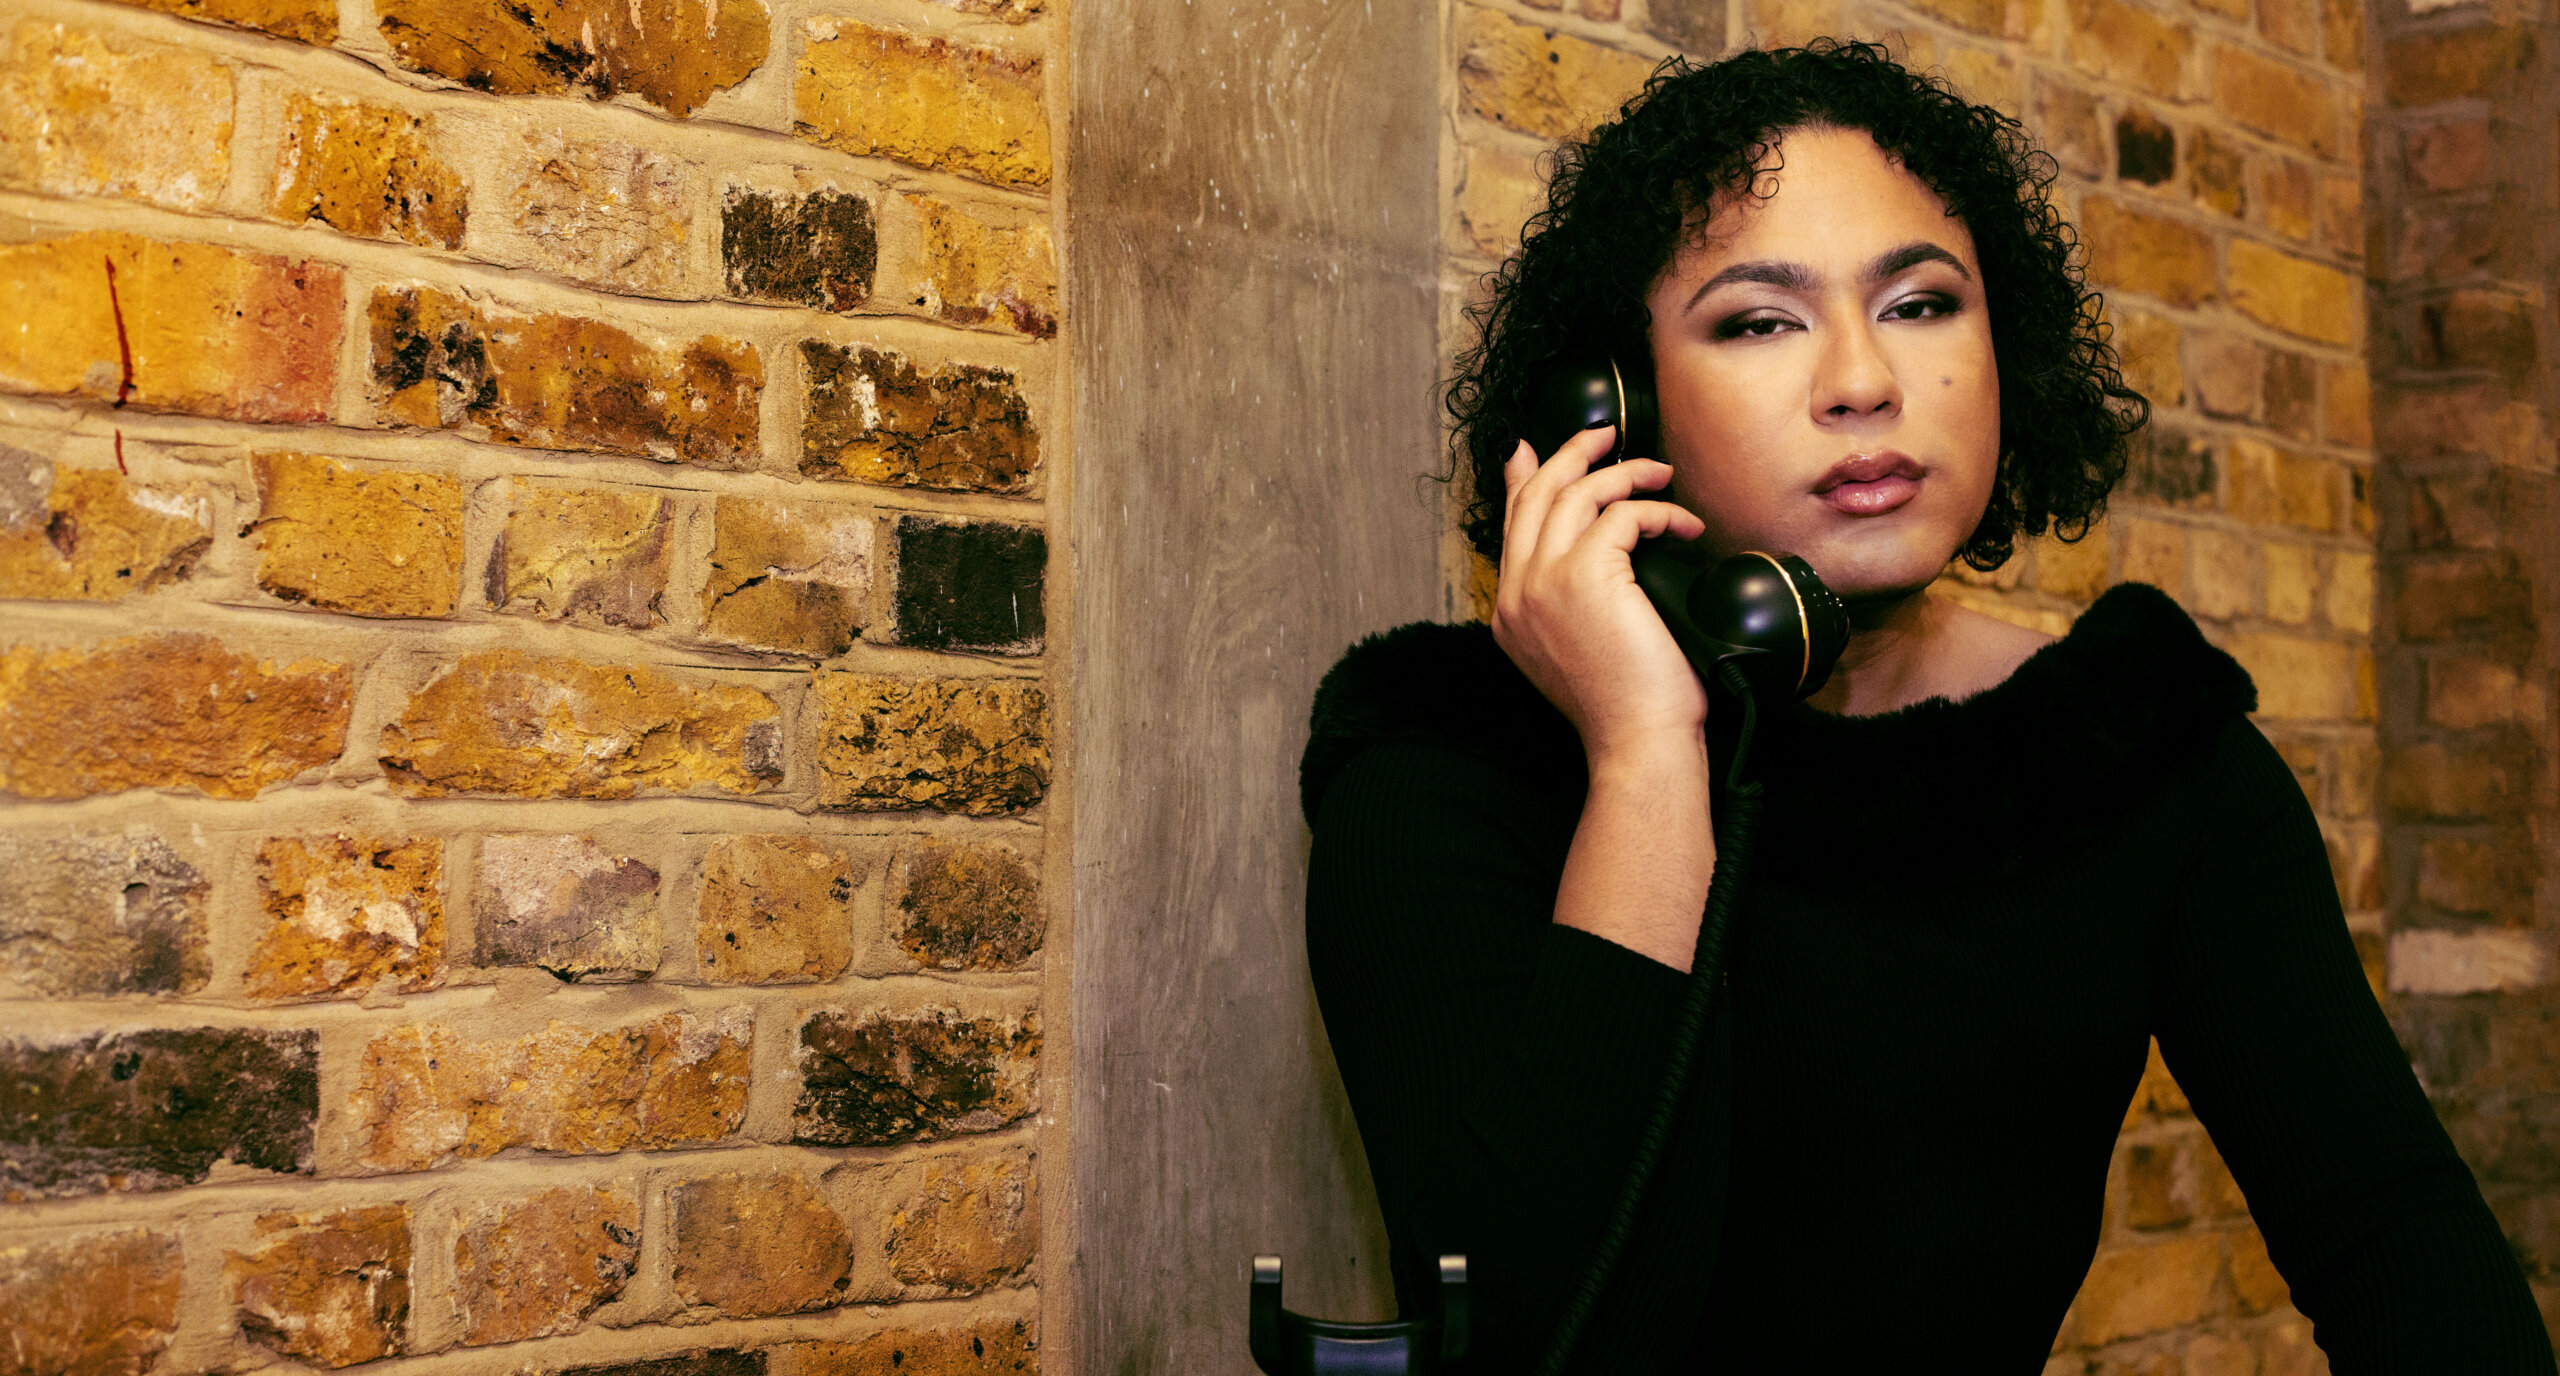 A person dressed in black sits looking at the camera, holding a black landline phone to their ear